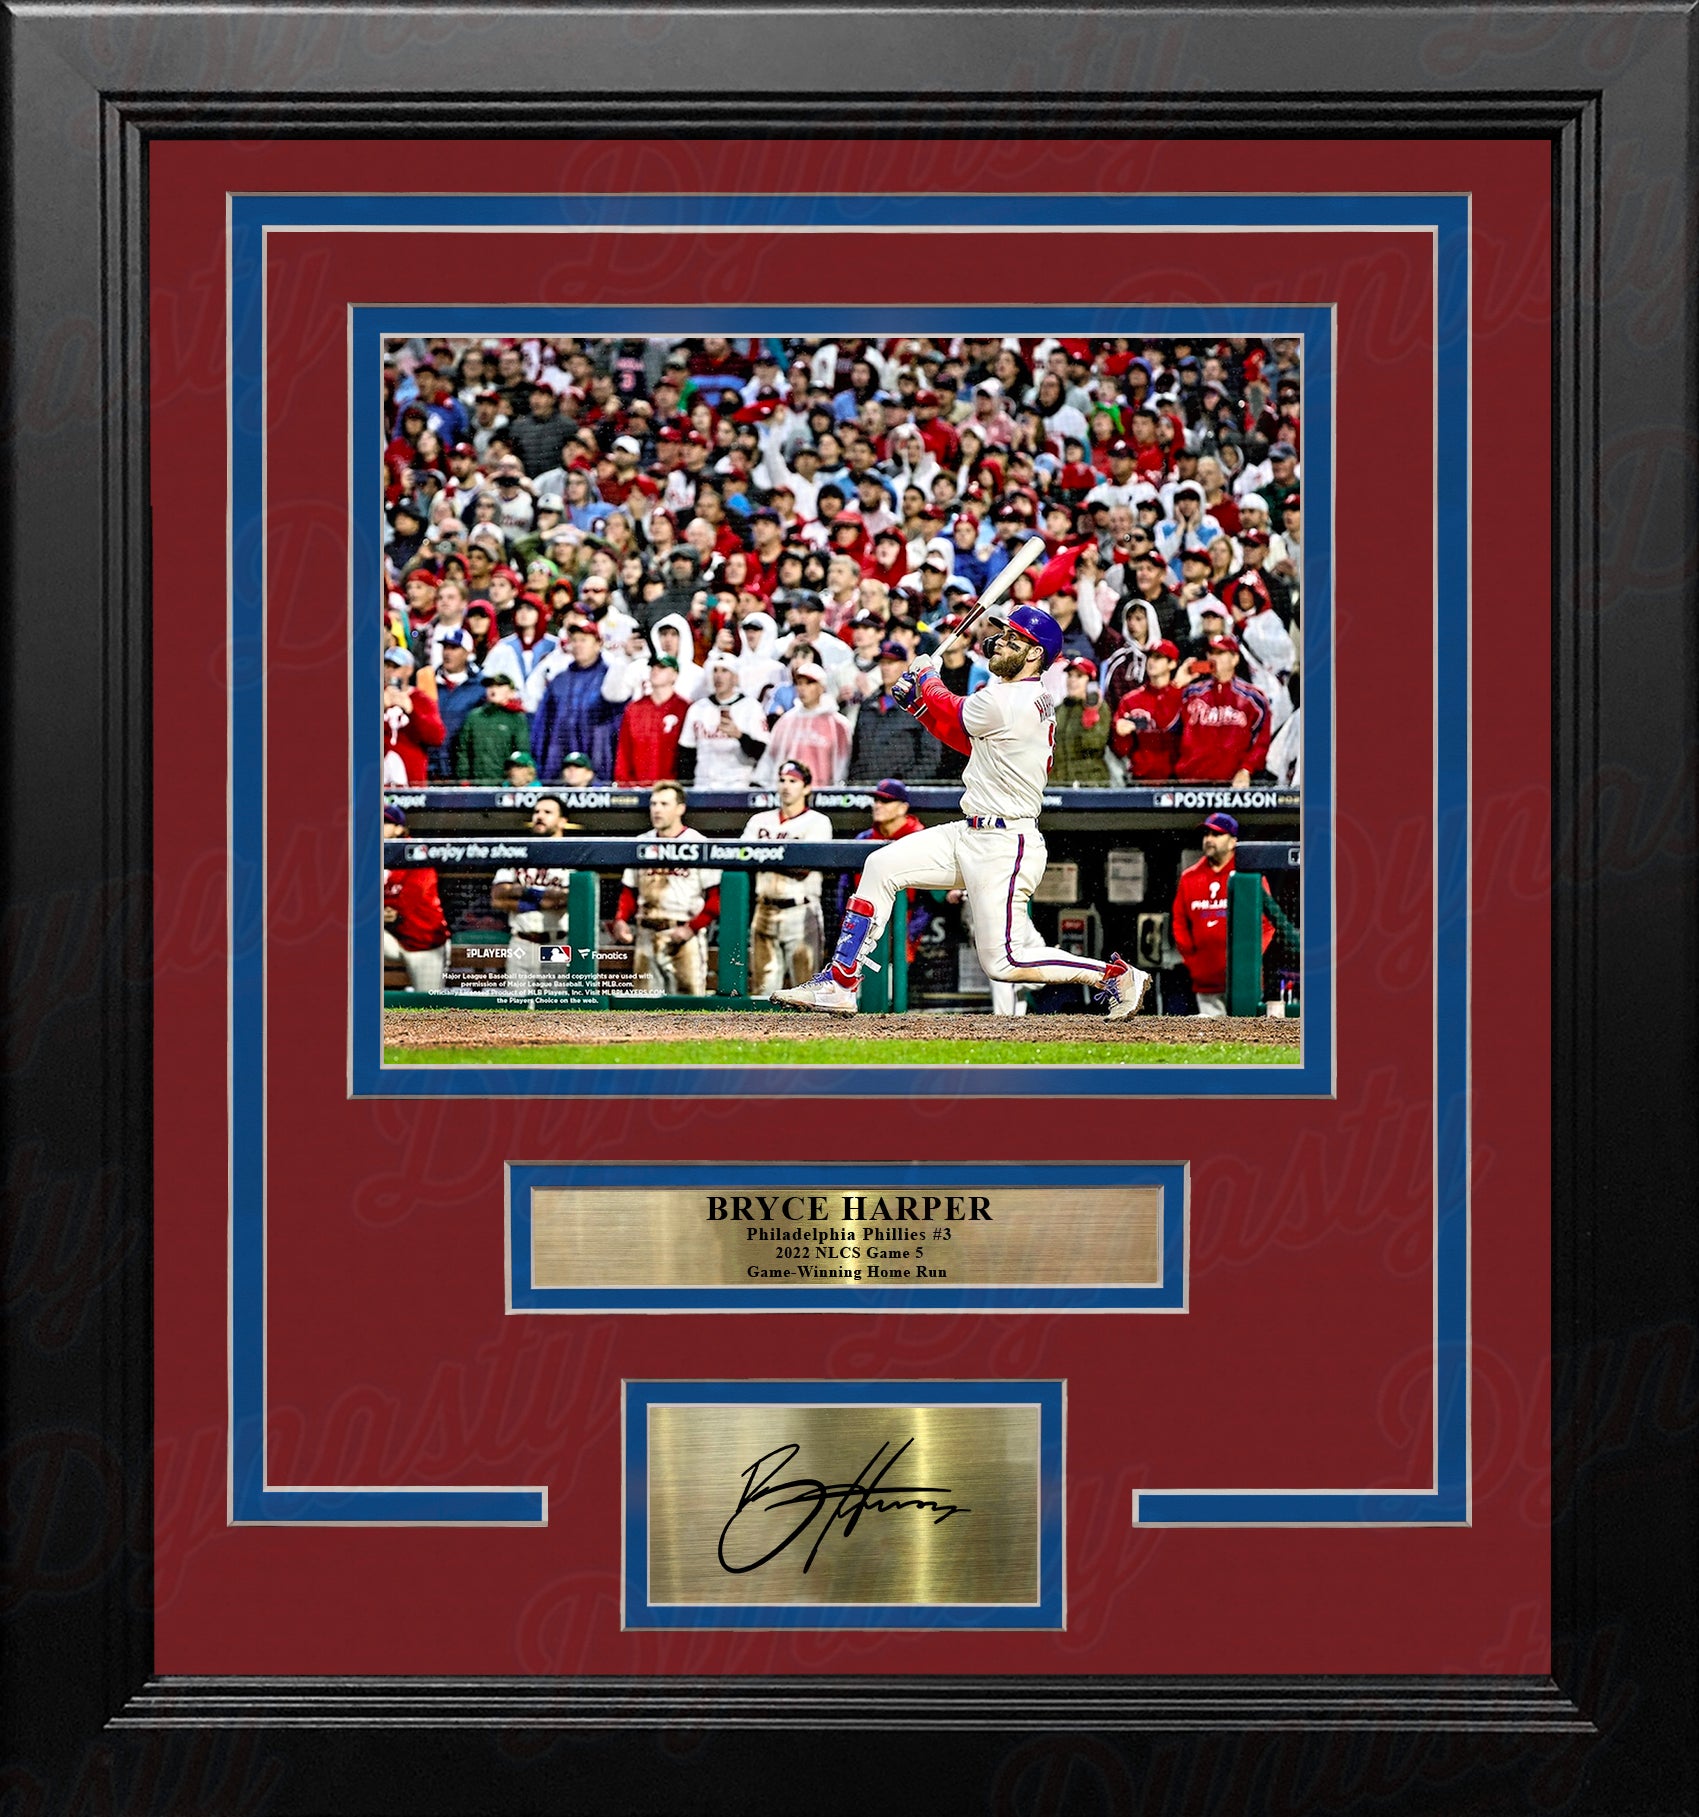 Bryce Harper NLCS Game 5 Home Run Philadelphia Phillies 8x10 Framed Photo with Engraved Autograph - Dynasty Sports & Framing 